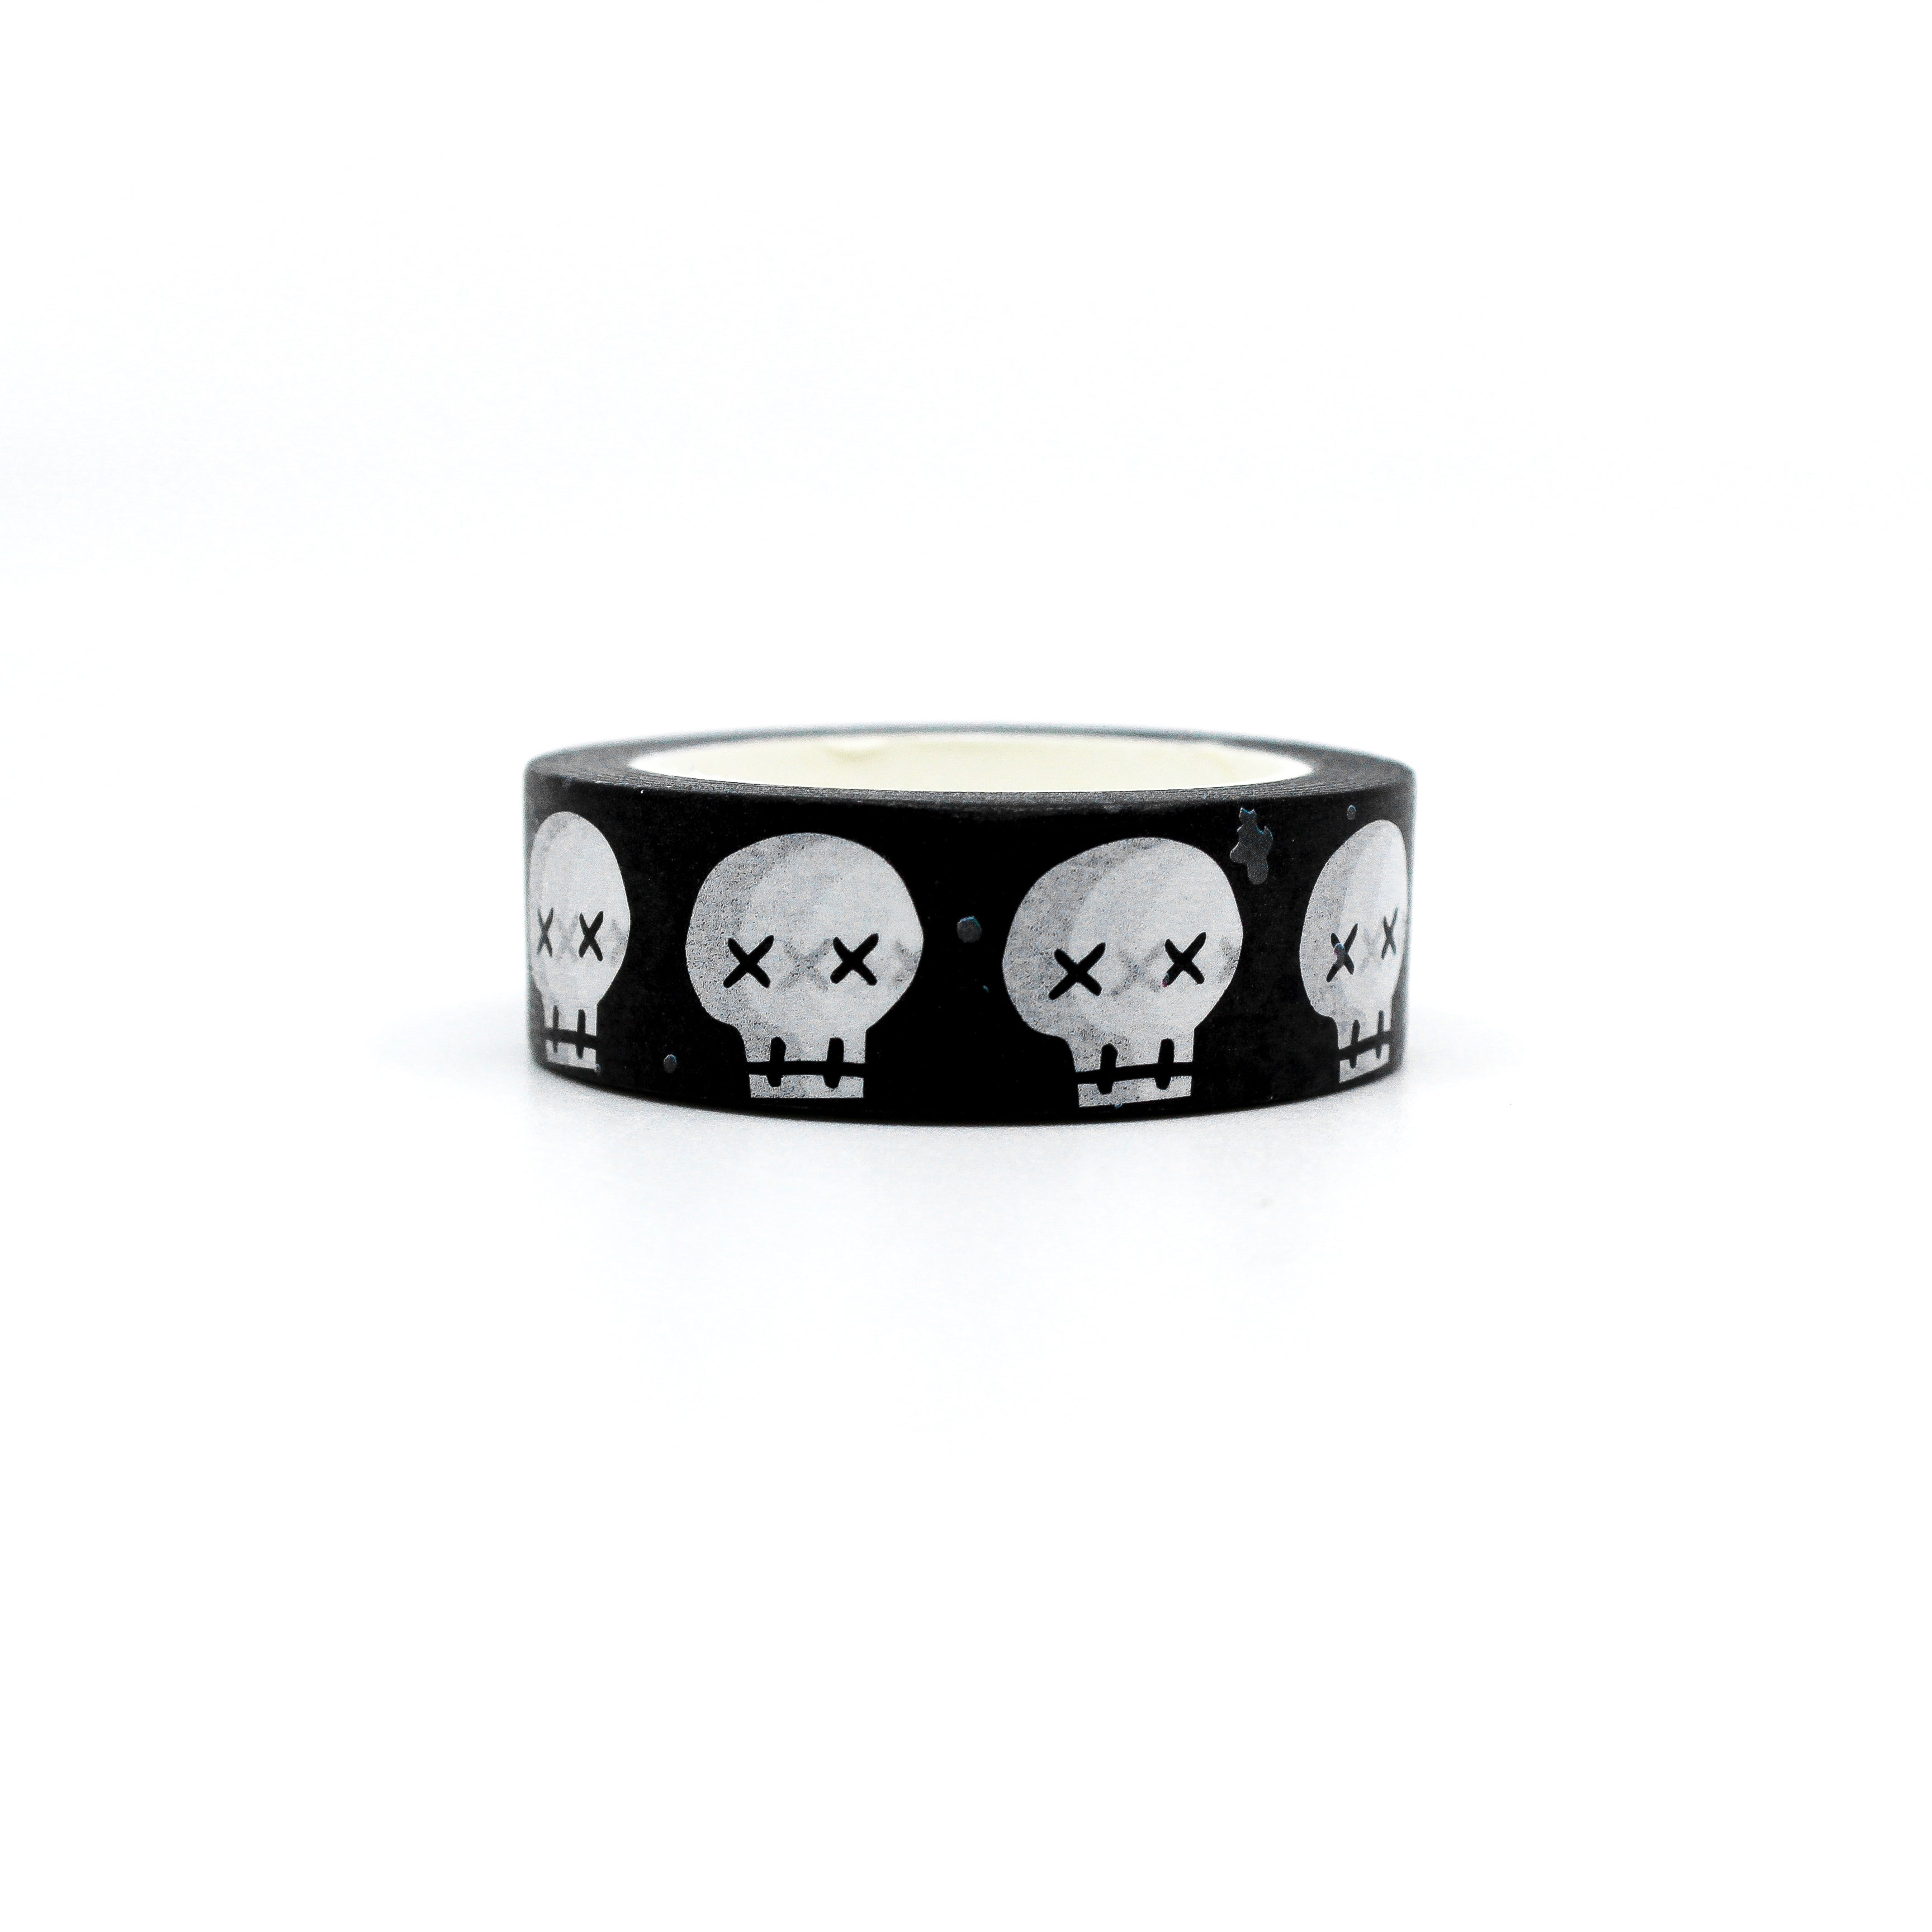 This is a cartoon comic book skull washi tape from BBB Supplies Craft Shop